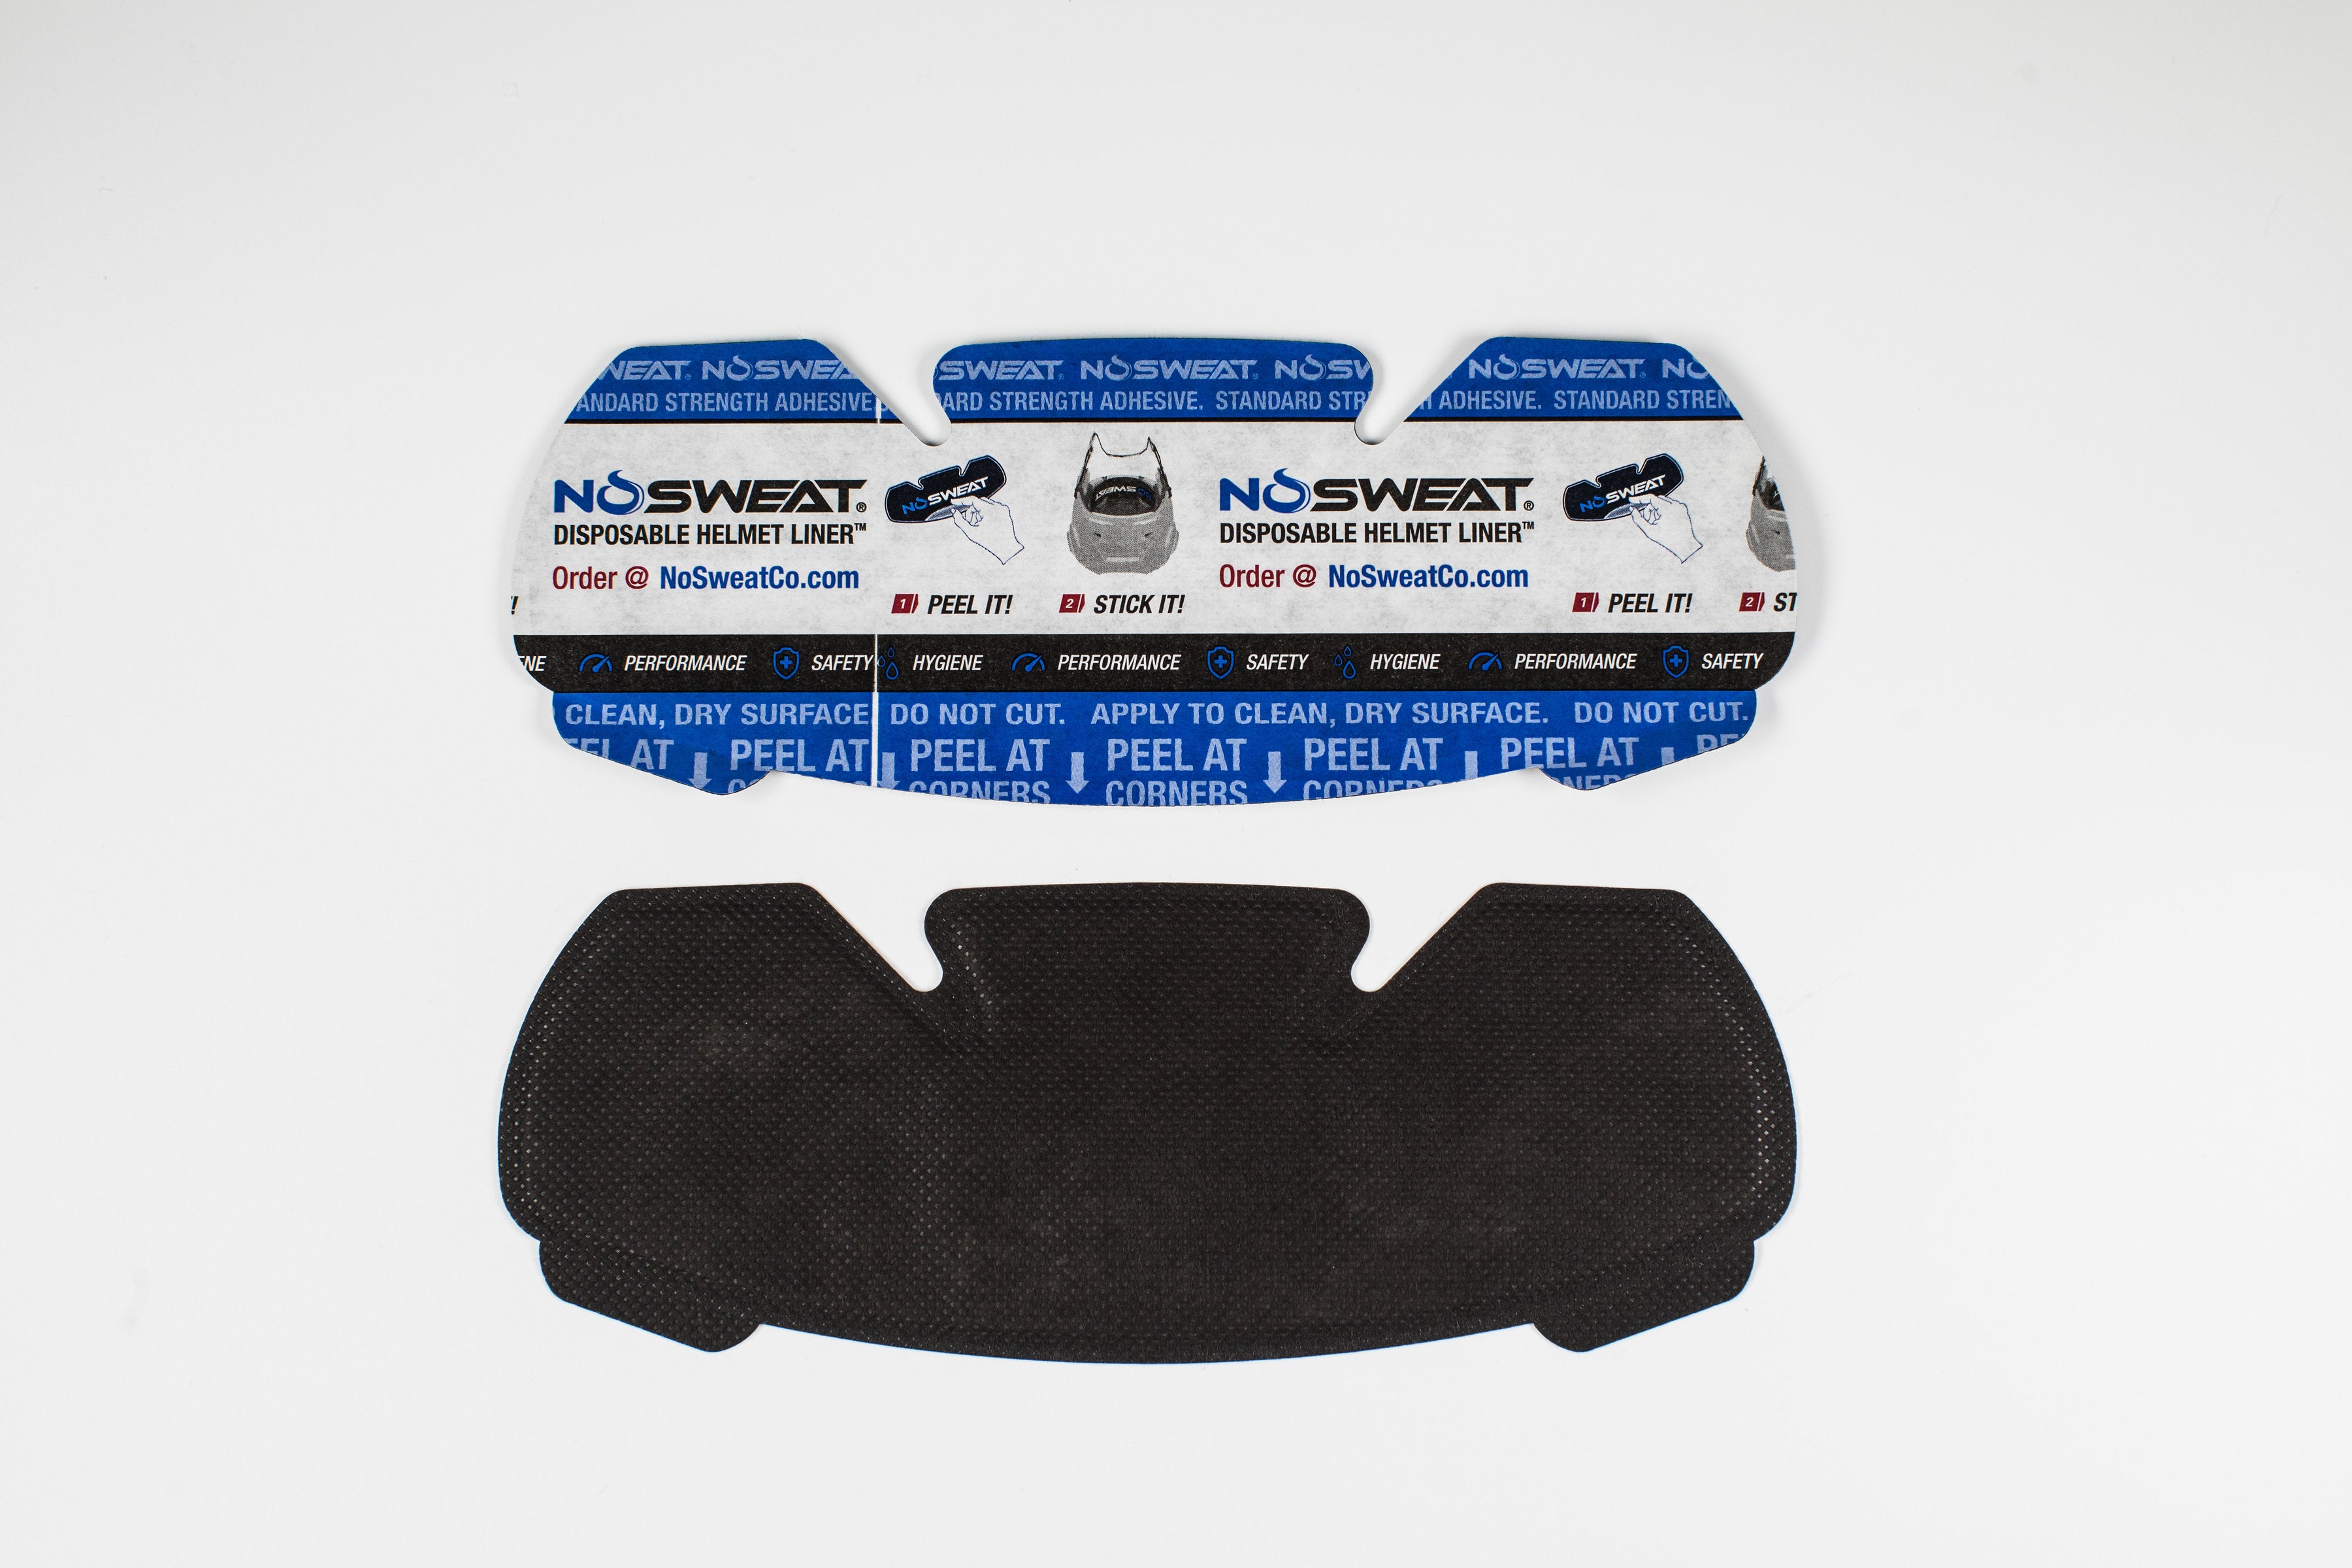 Helmet Liner X2 for Sweat Control in Hot Humid Conditions